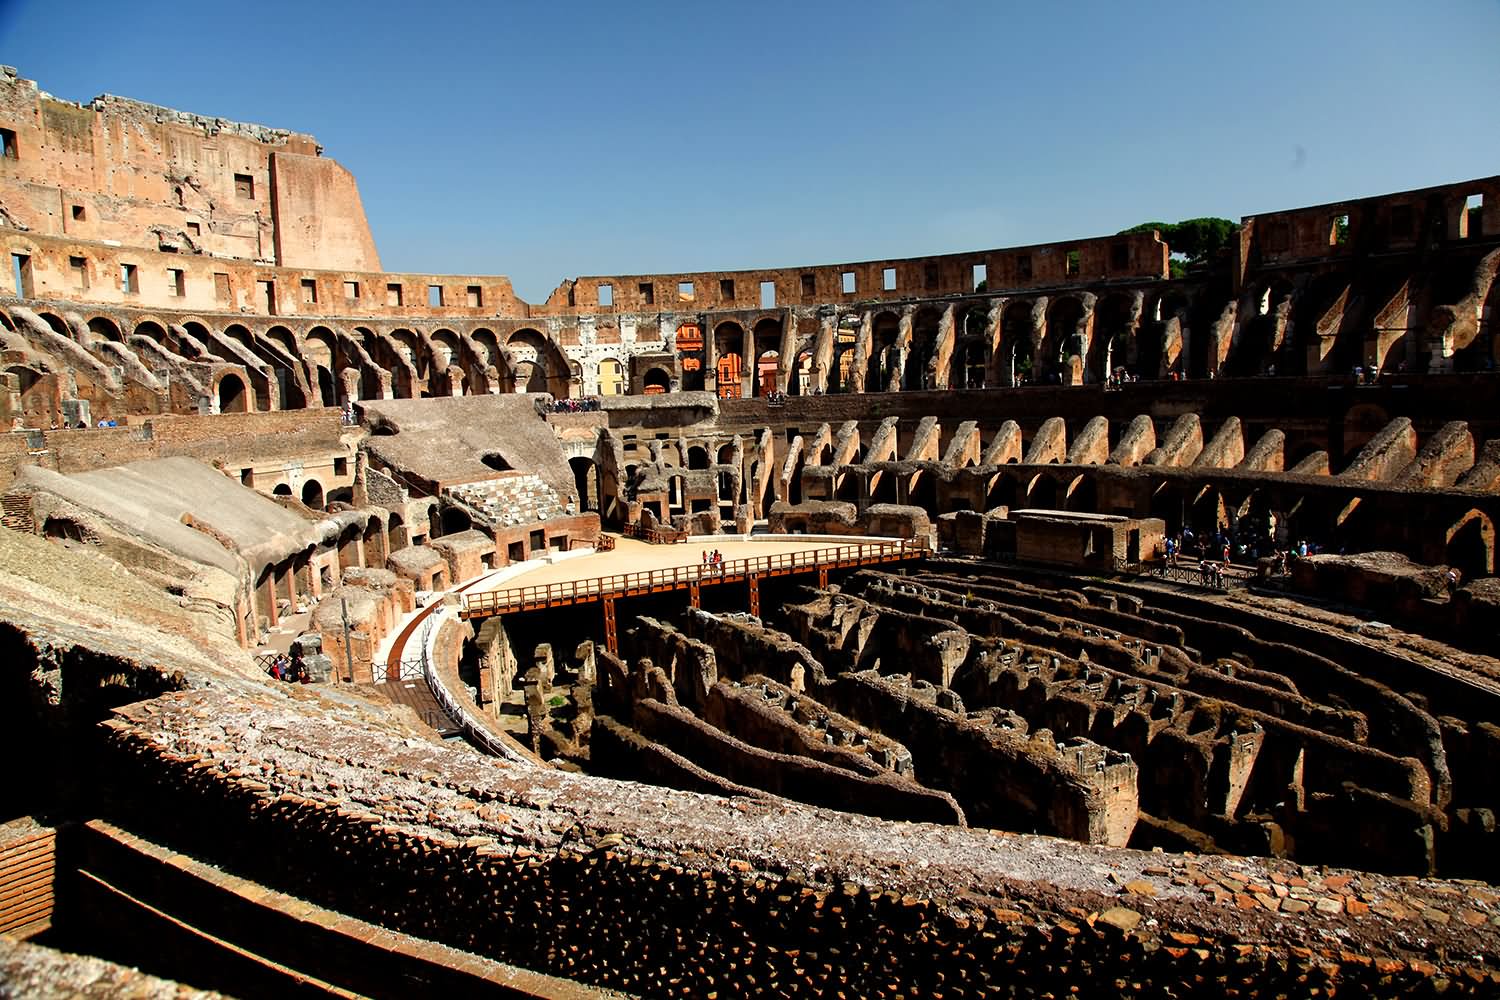 Inside Picture Of The Colosseum